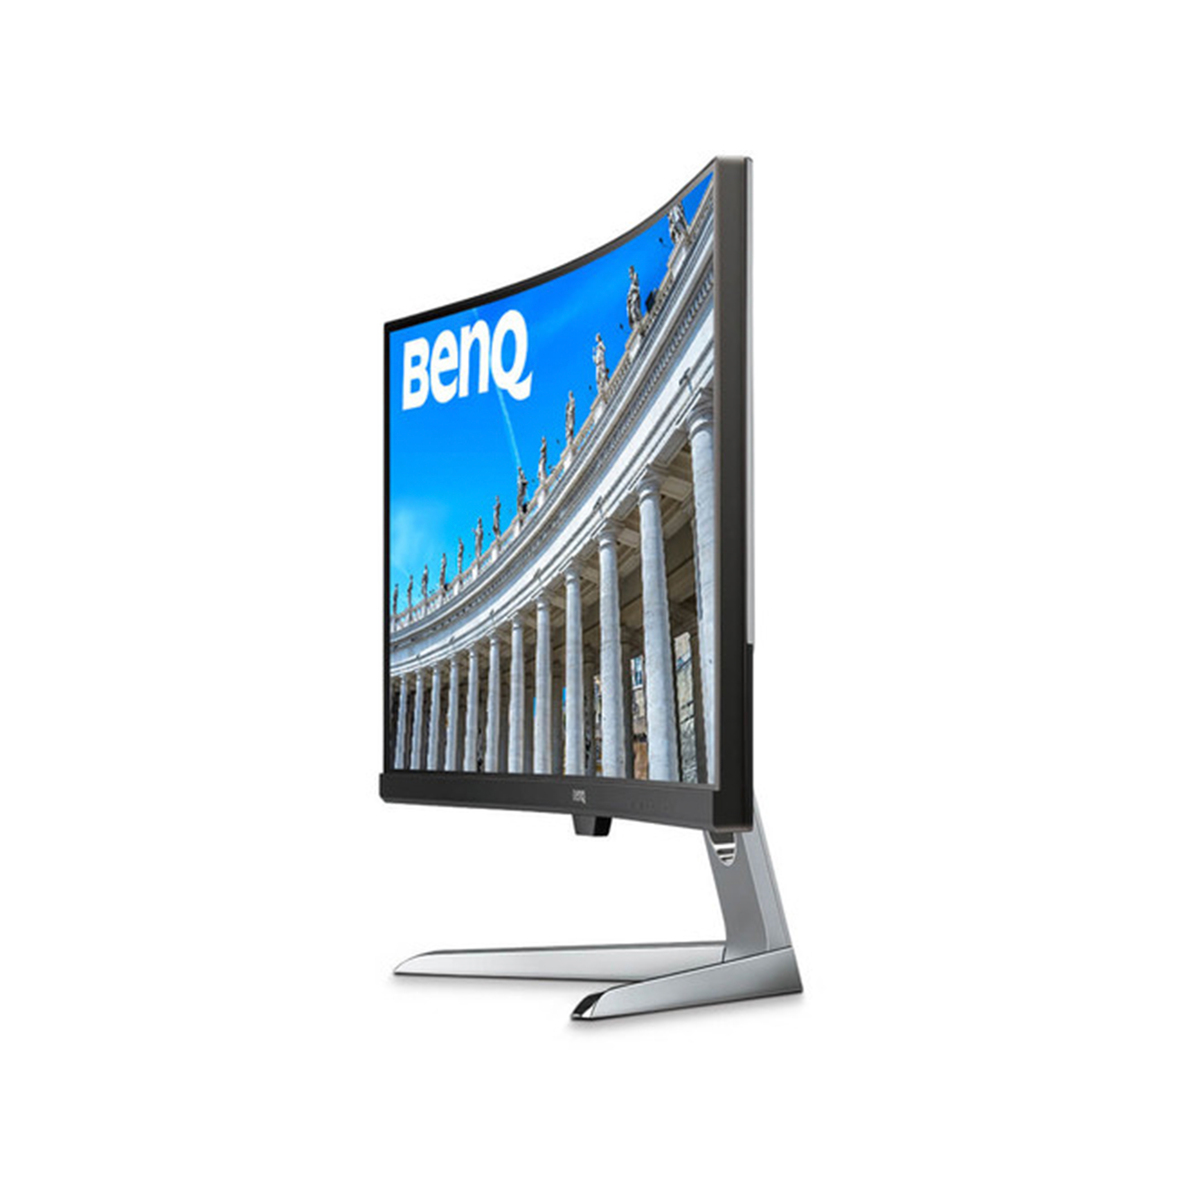 BenQ EX3501R 35" 21:9 Curved LCD Monitor